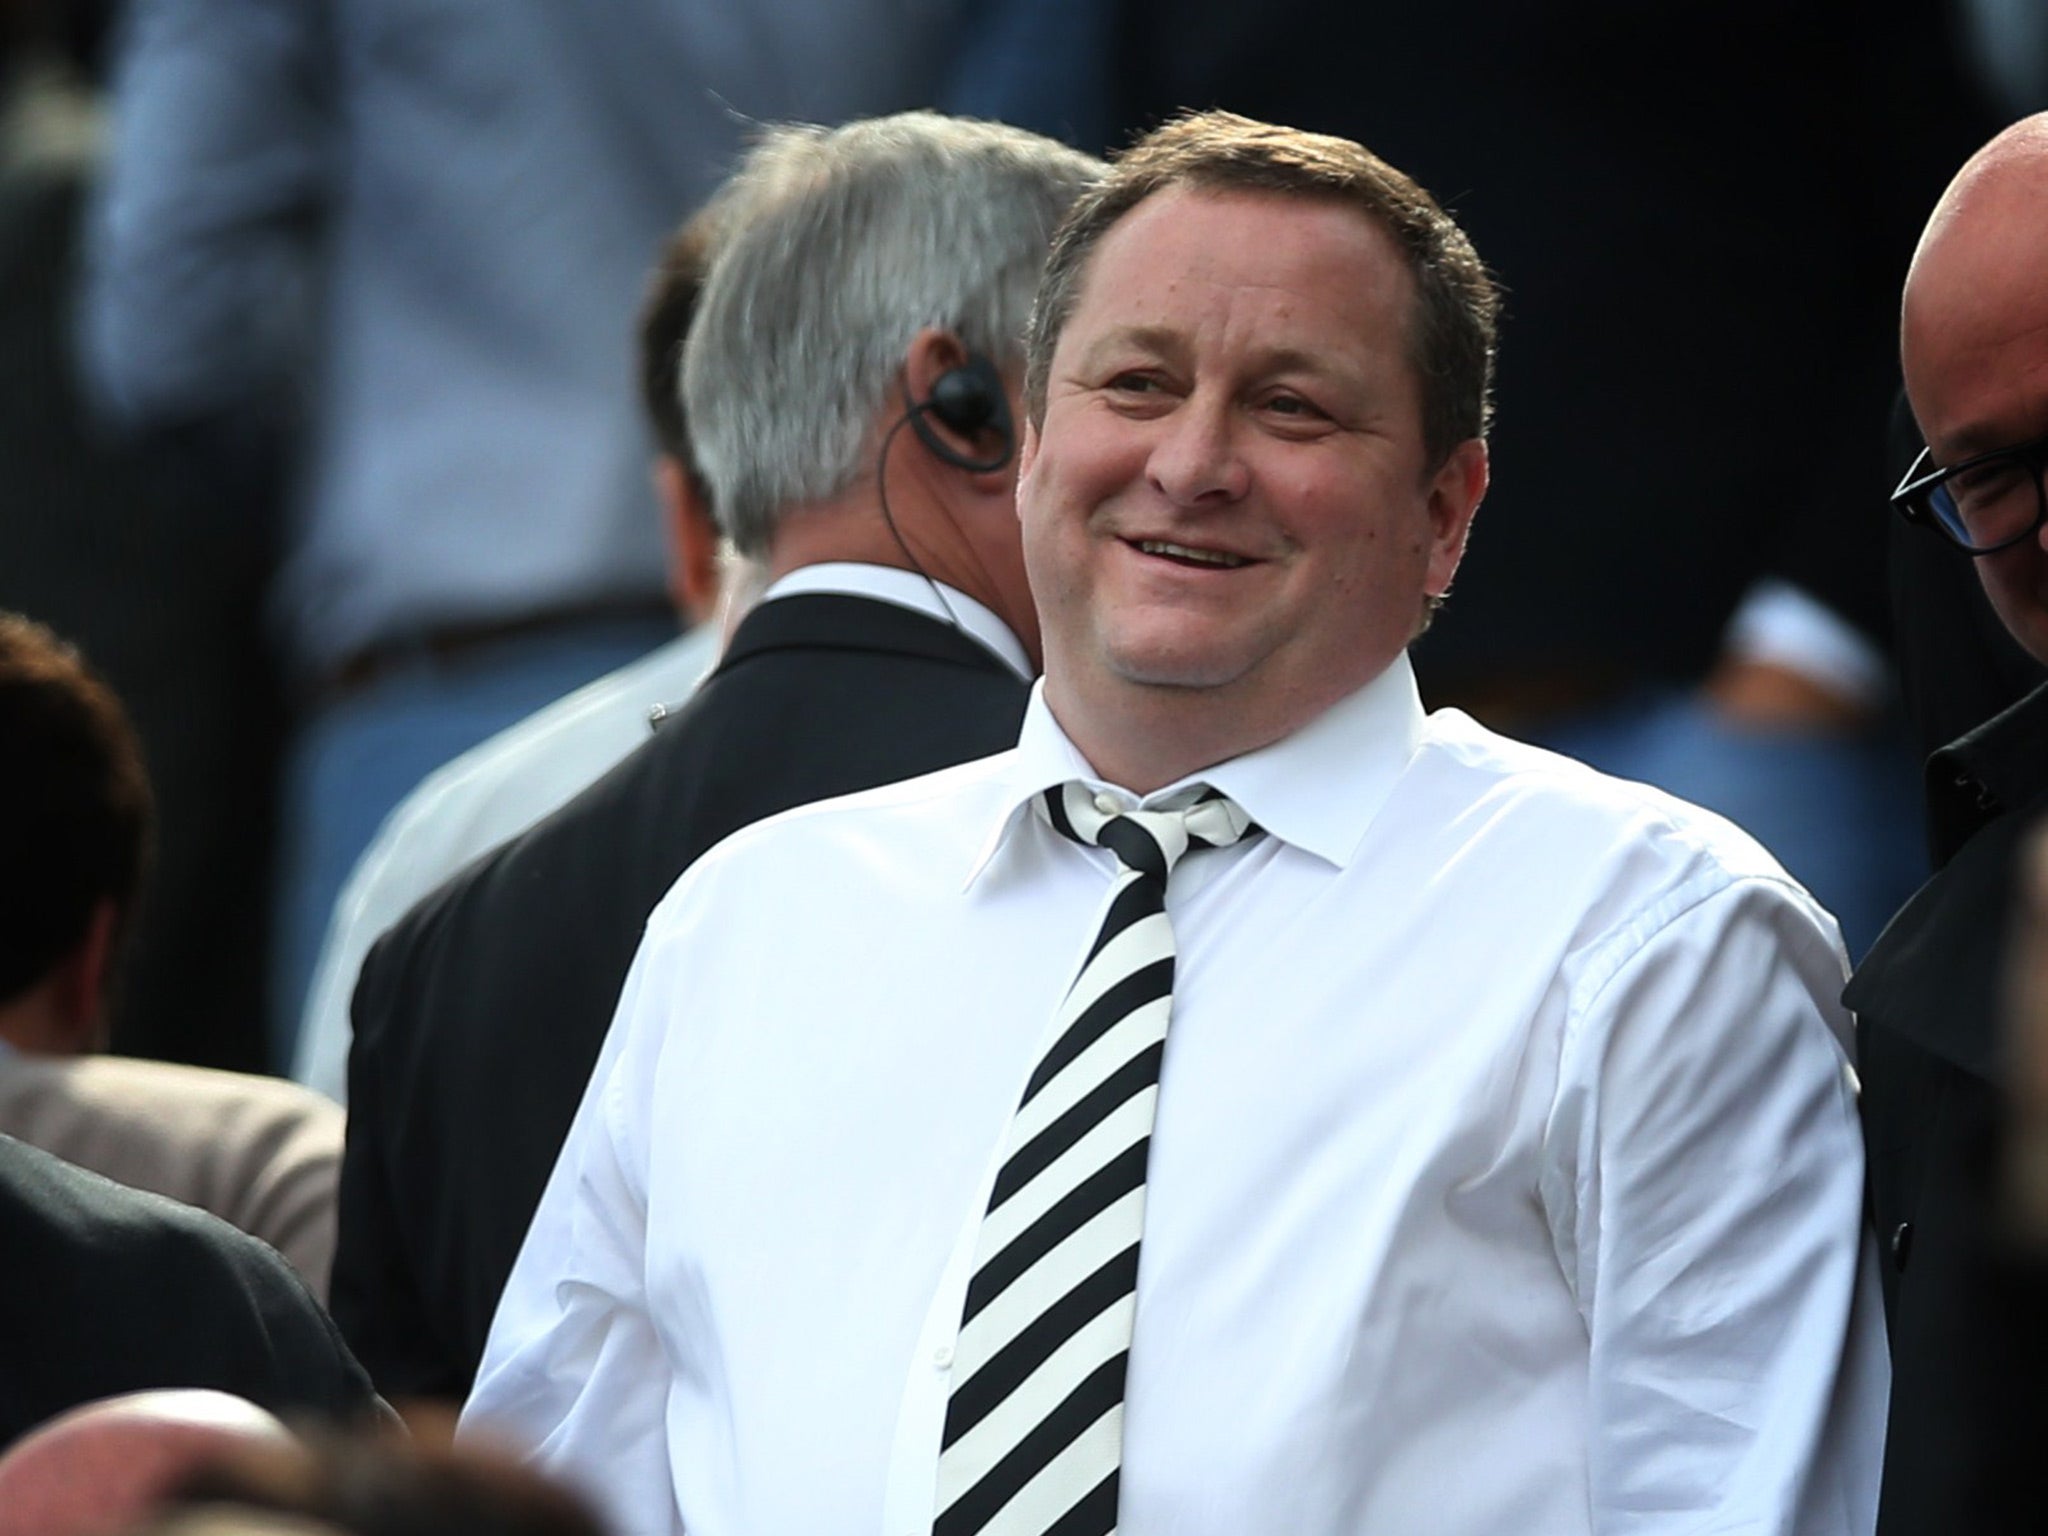 Mike Ashley has sold his stake in Rangers